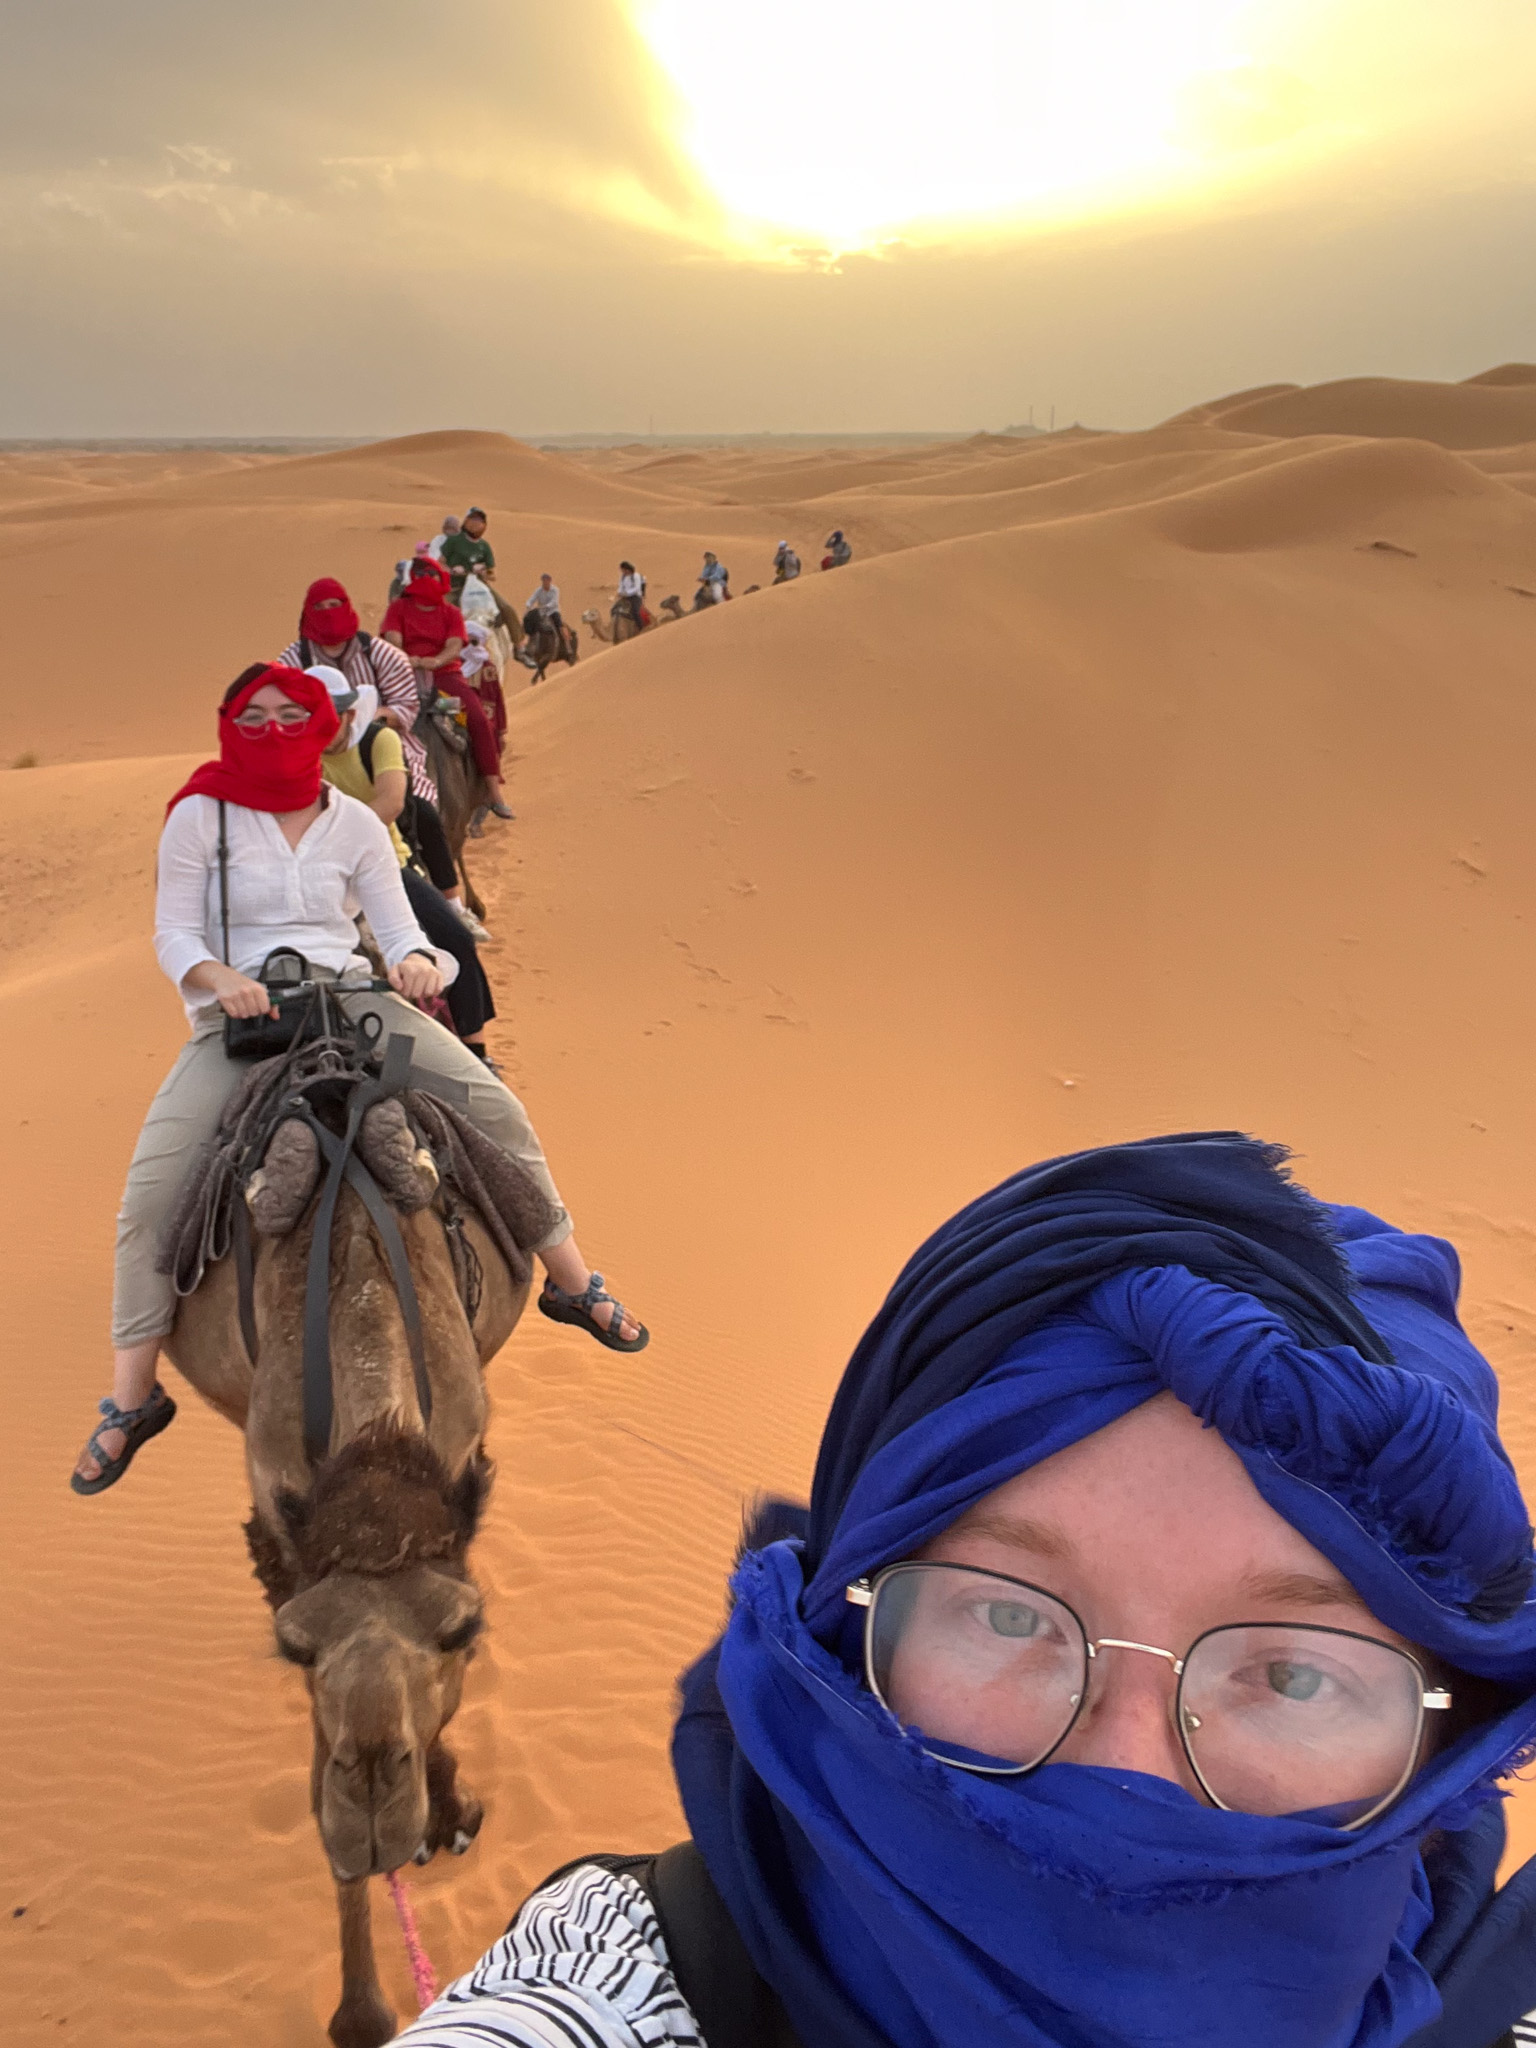 Image of Emily and other students riding a camel in the dessert